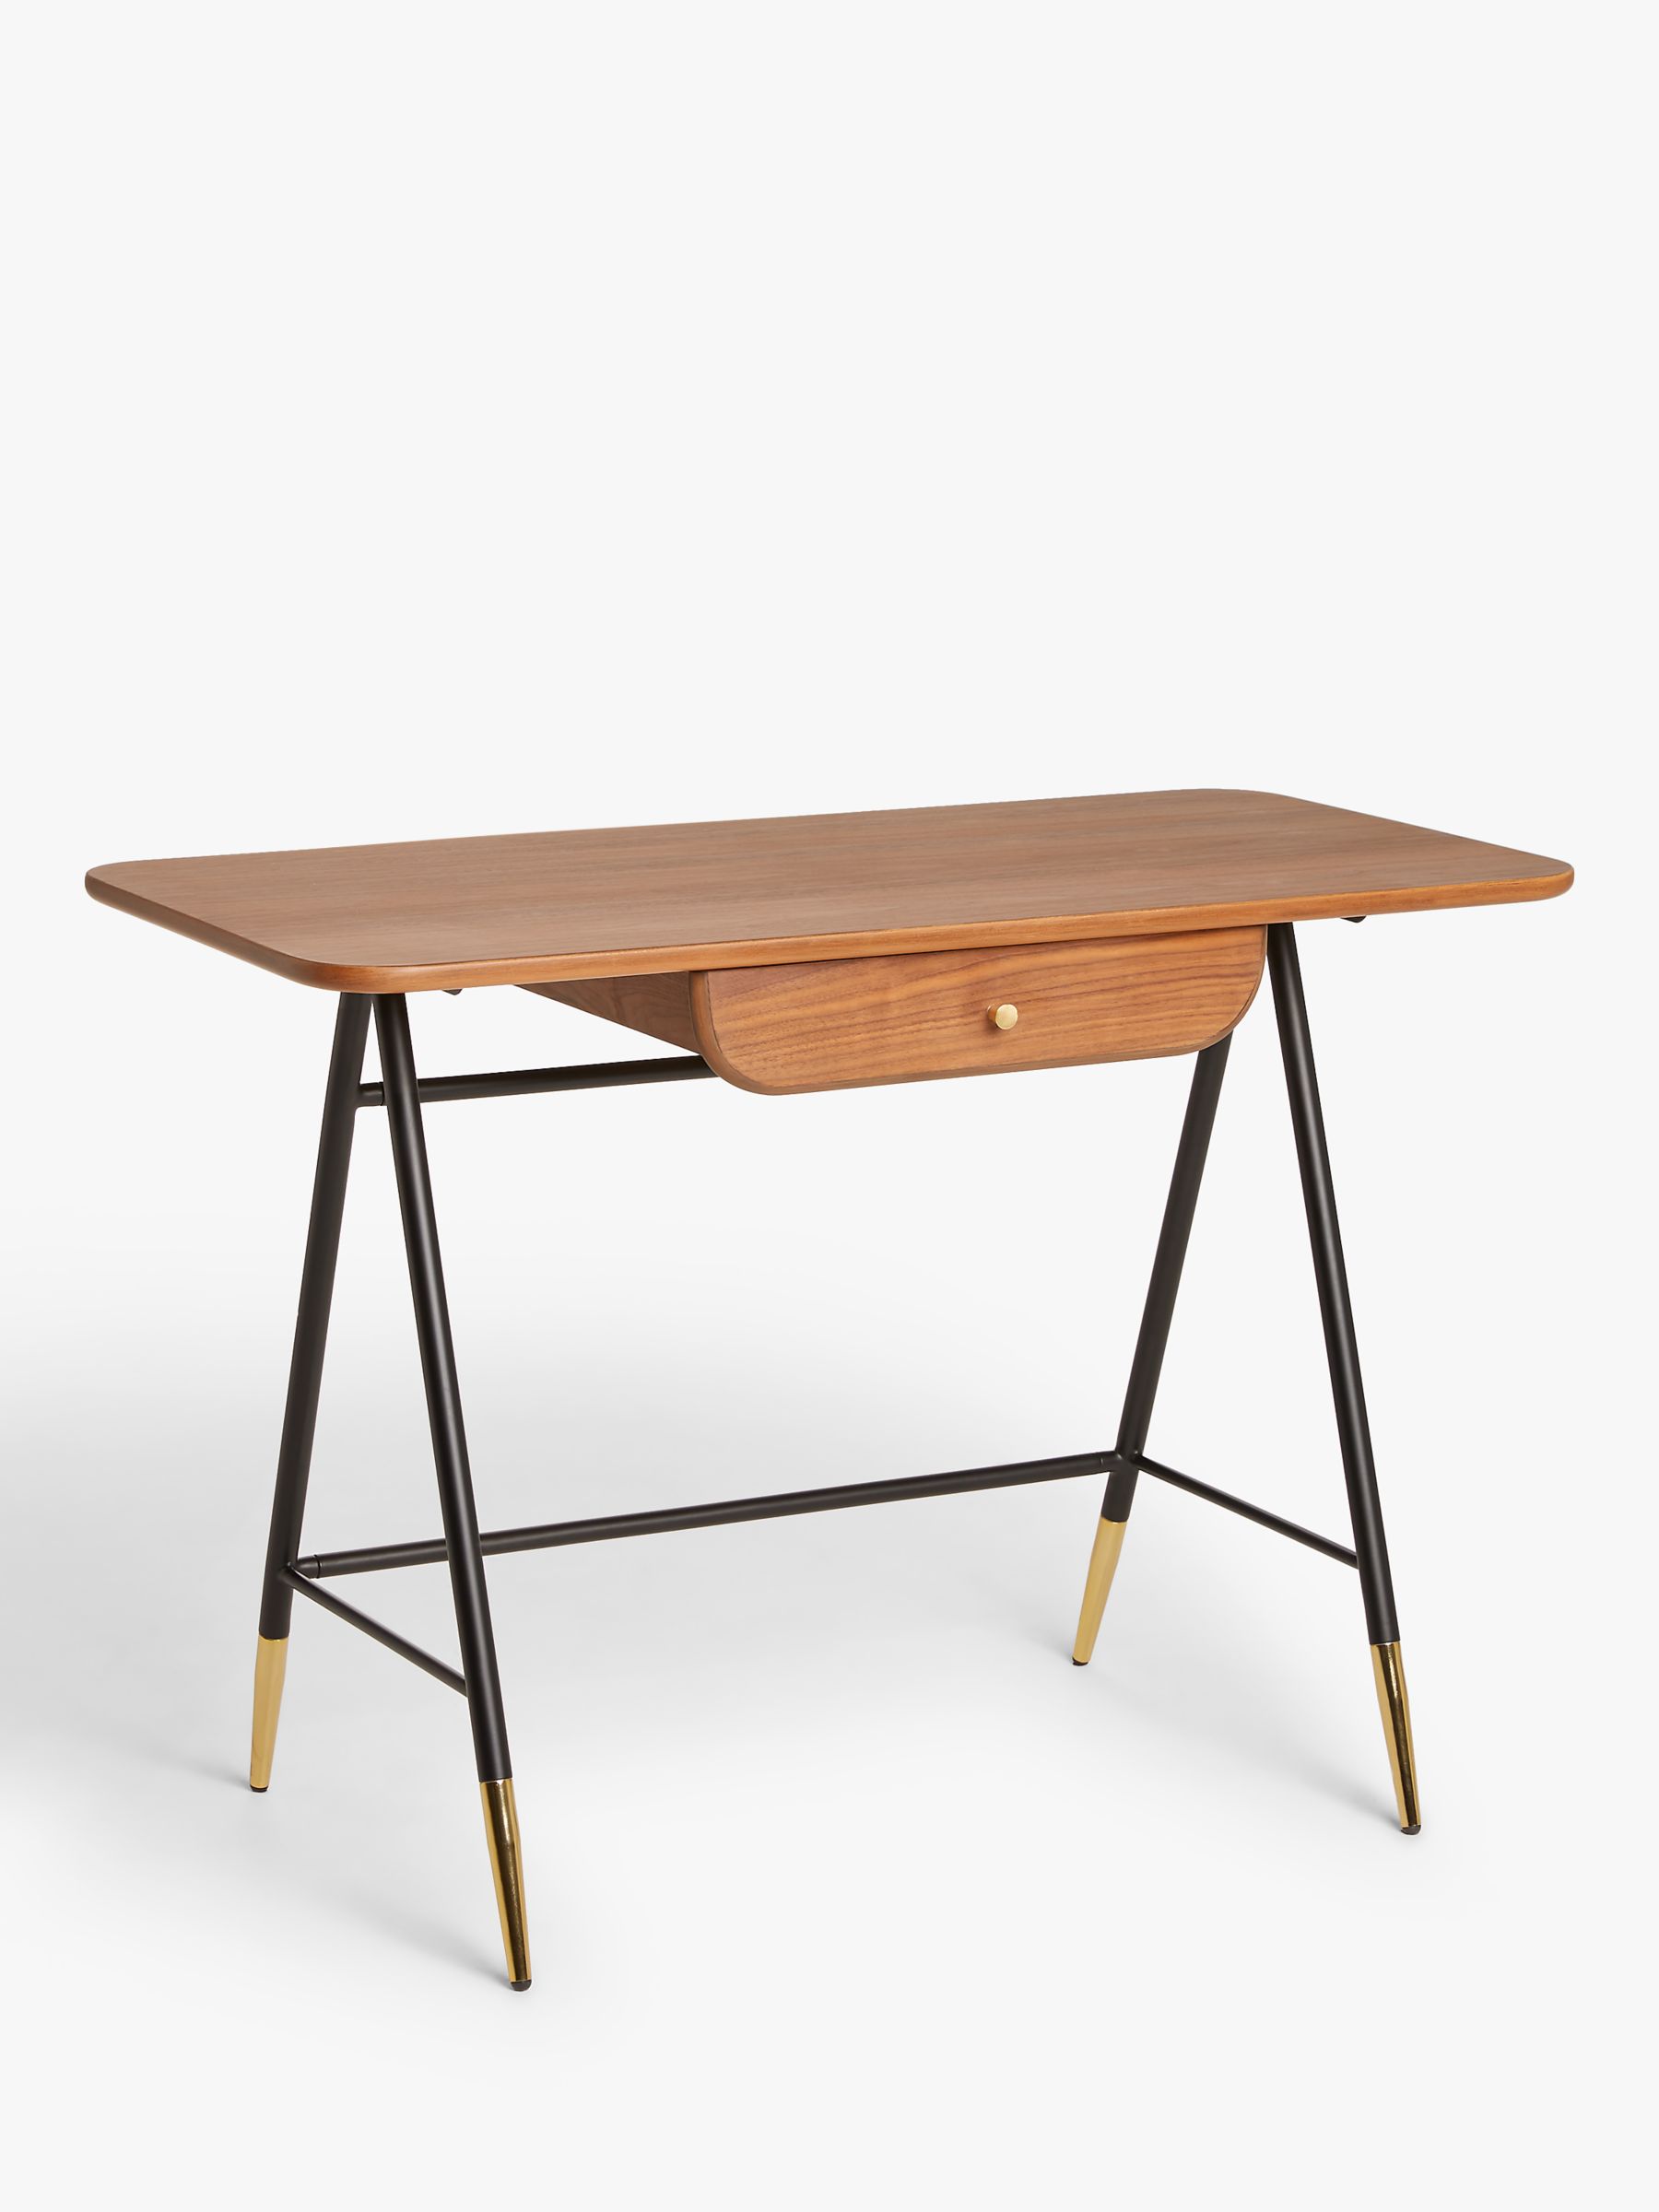 Photo of John lewis + swoon hargreaves desk natural